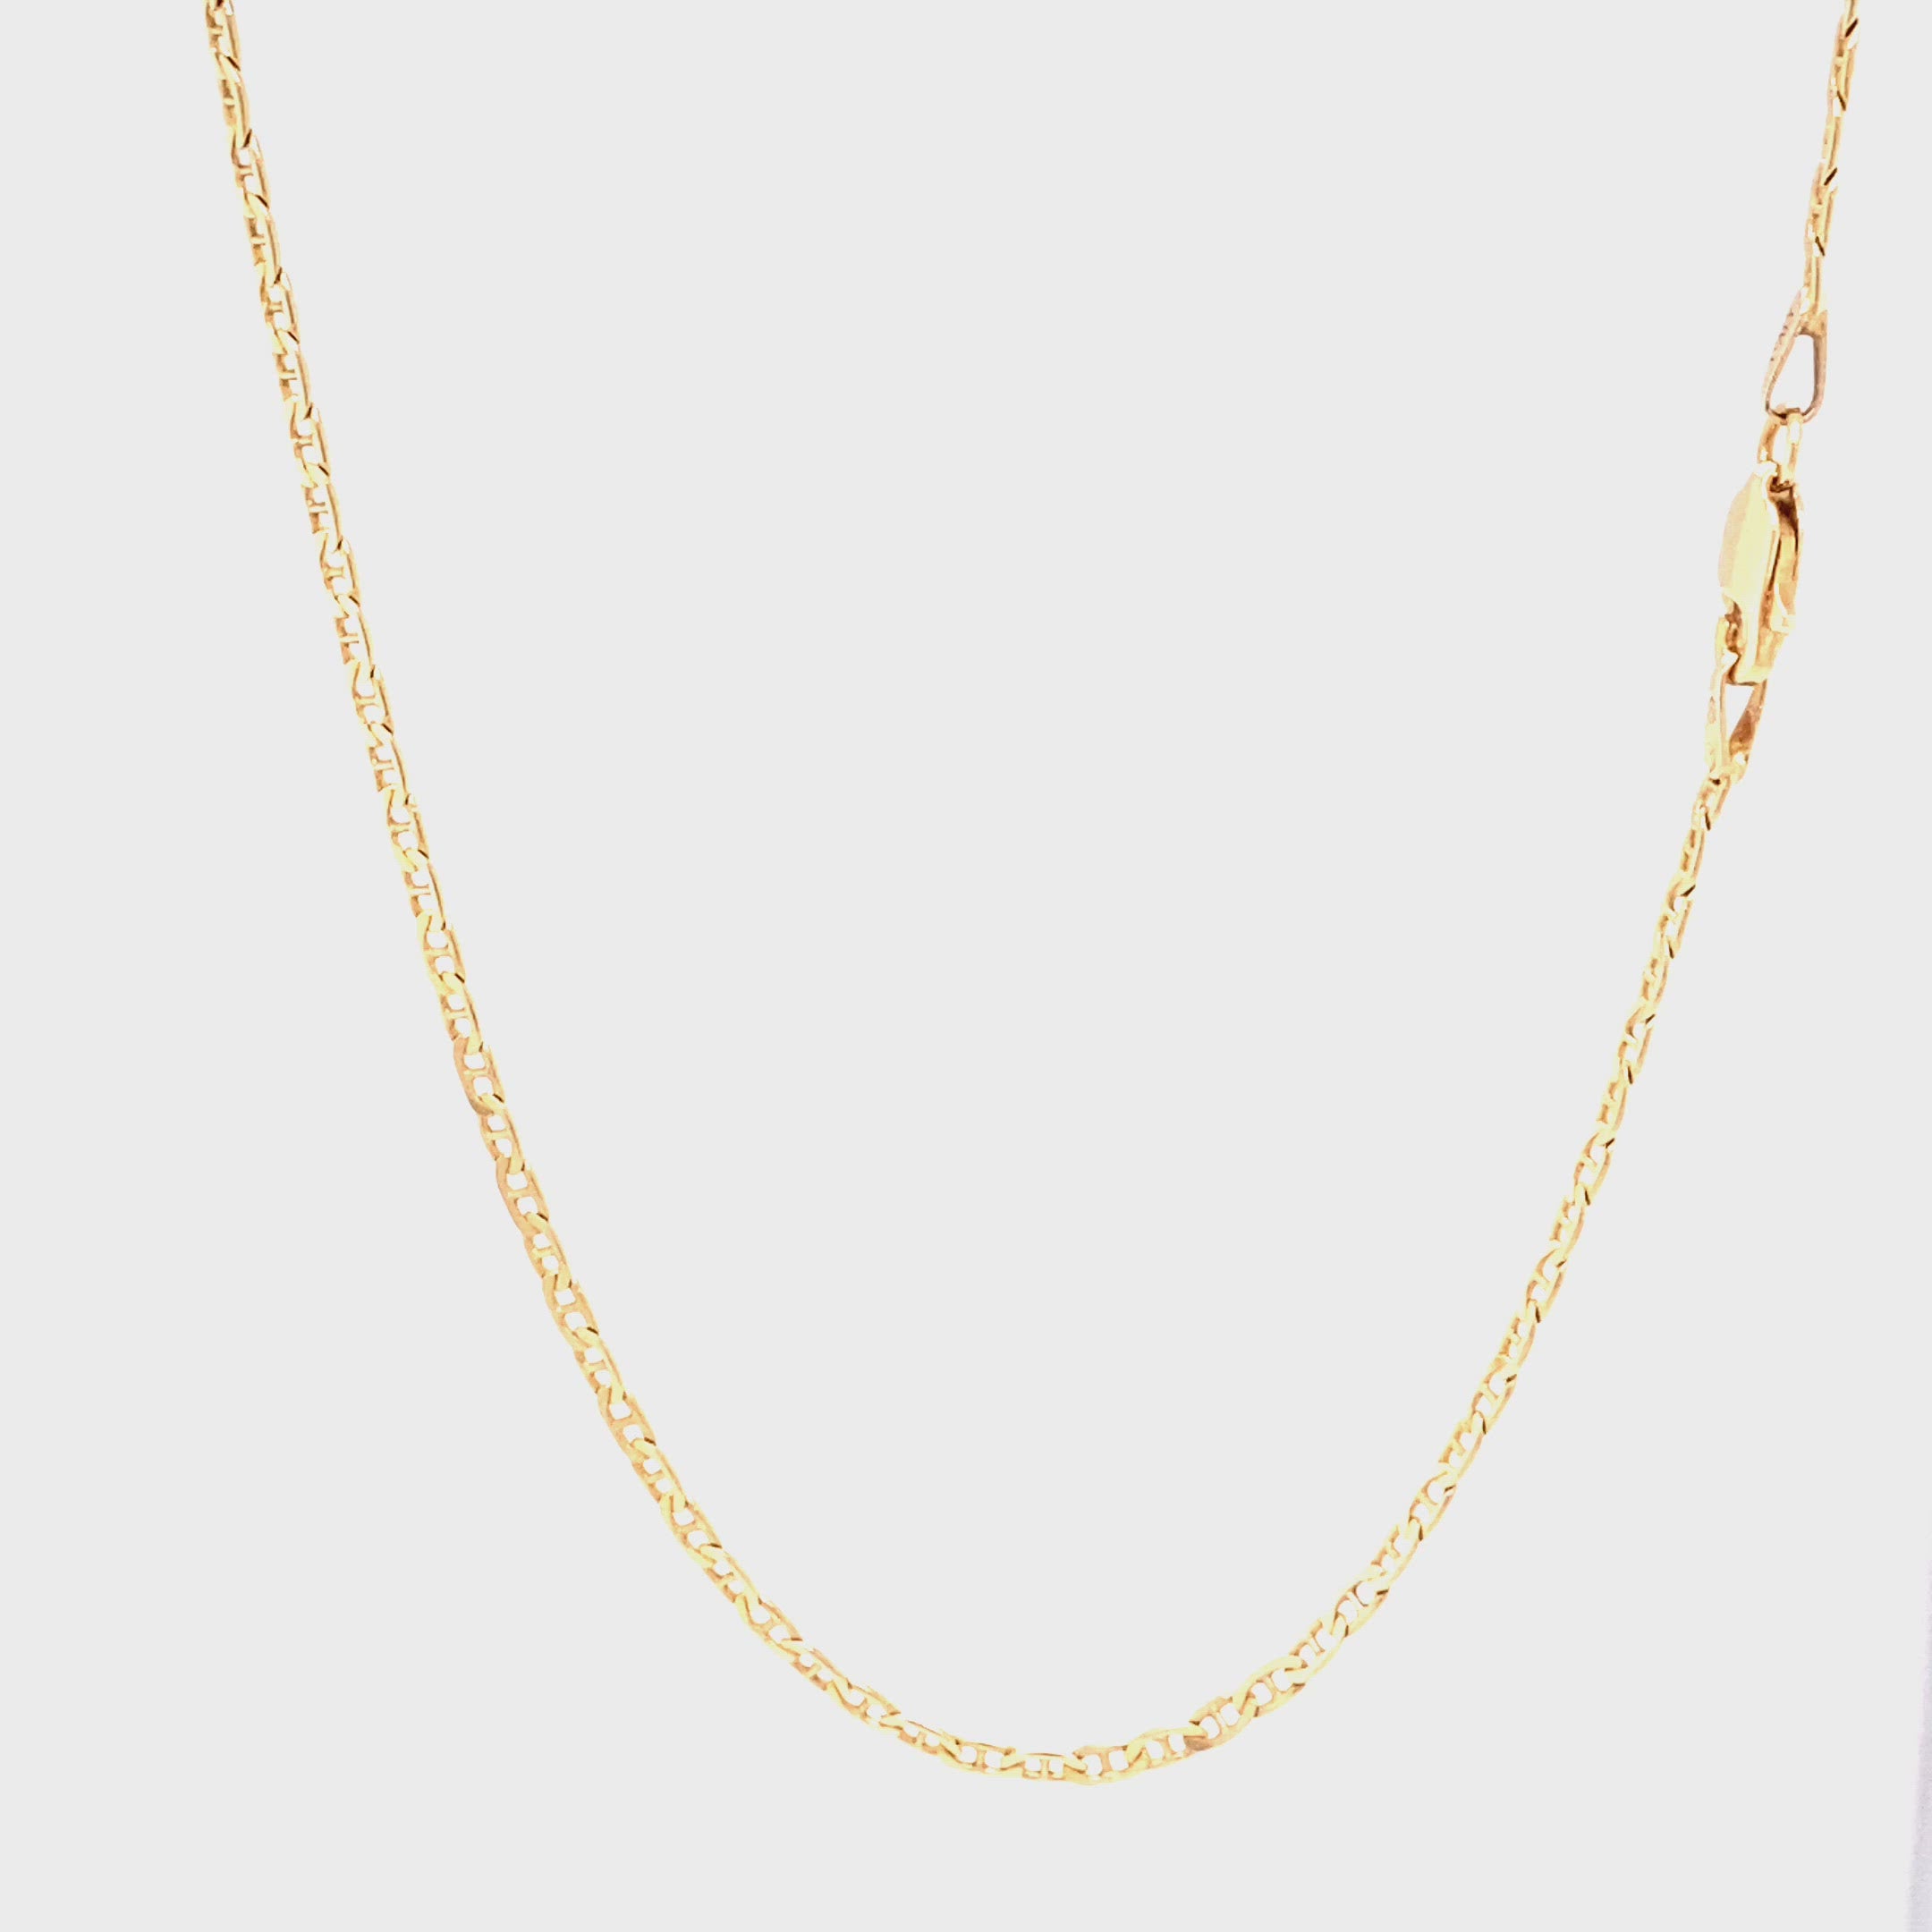 14K Solid Gold Mariner Chain Necklace 18" 3.3g 1.75mm Chain Gold Chain Vintage Jewelry Unisex Estate Jewelry Fine Jewelry Fine Jewellery